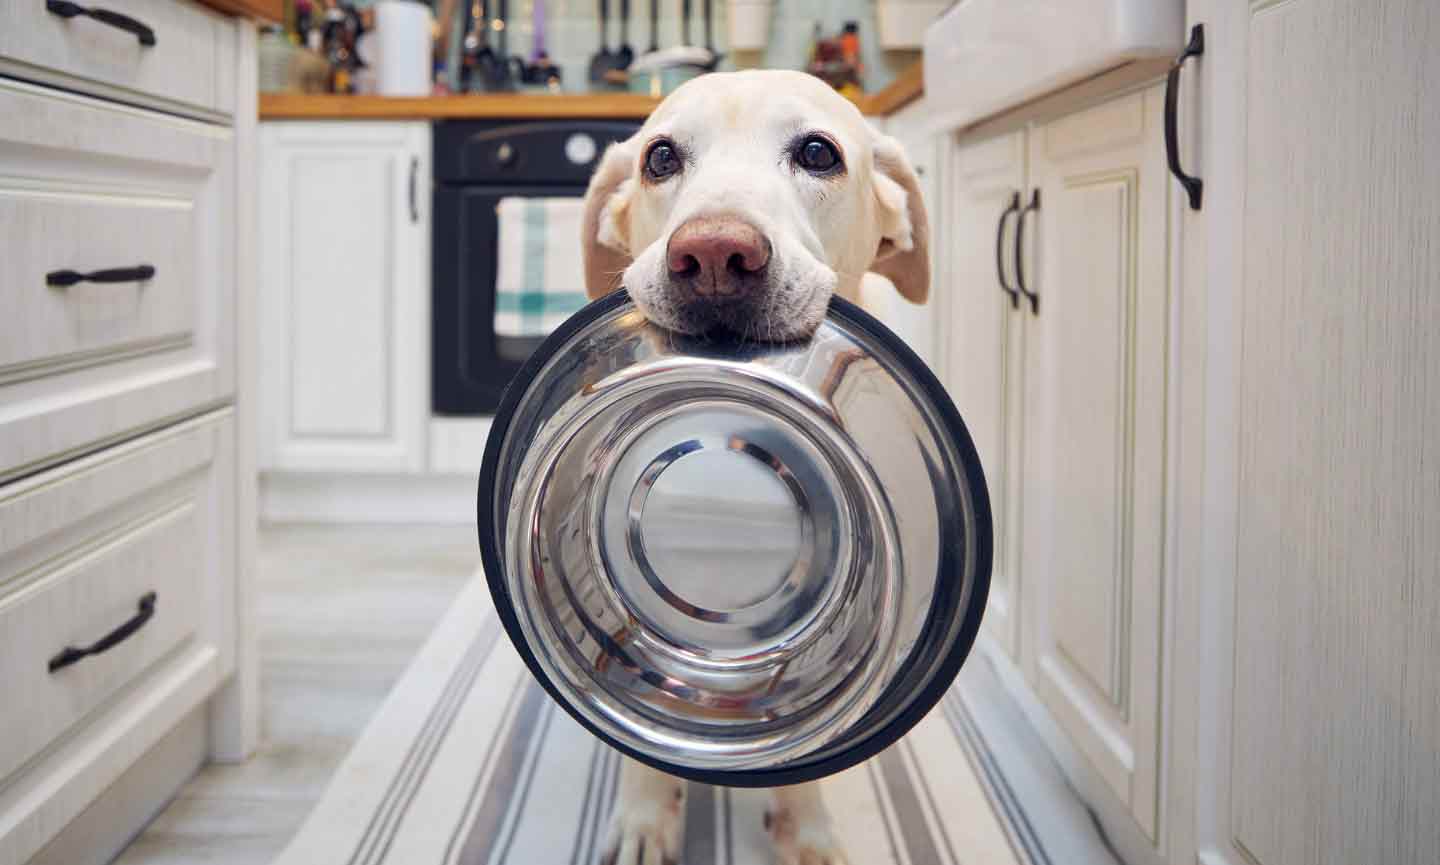 https://media-be.chewy.com/wp-content/uploads/2017/11/26102633/clean-dog-bowl.jpg